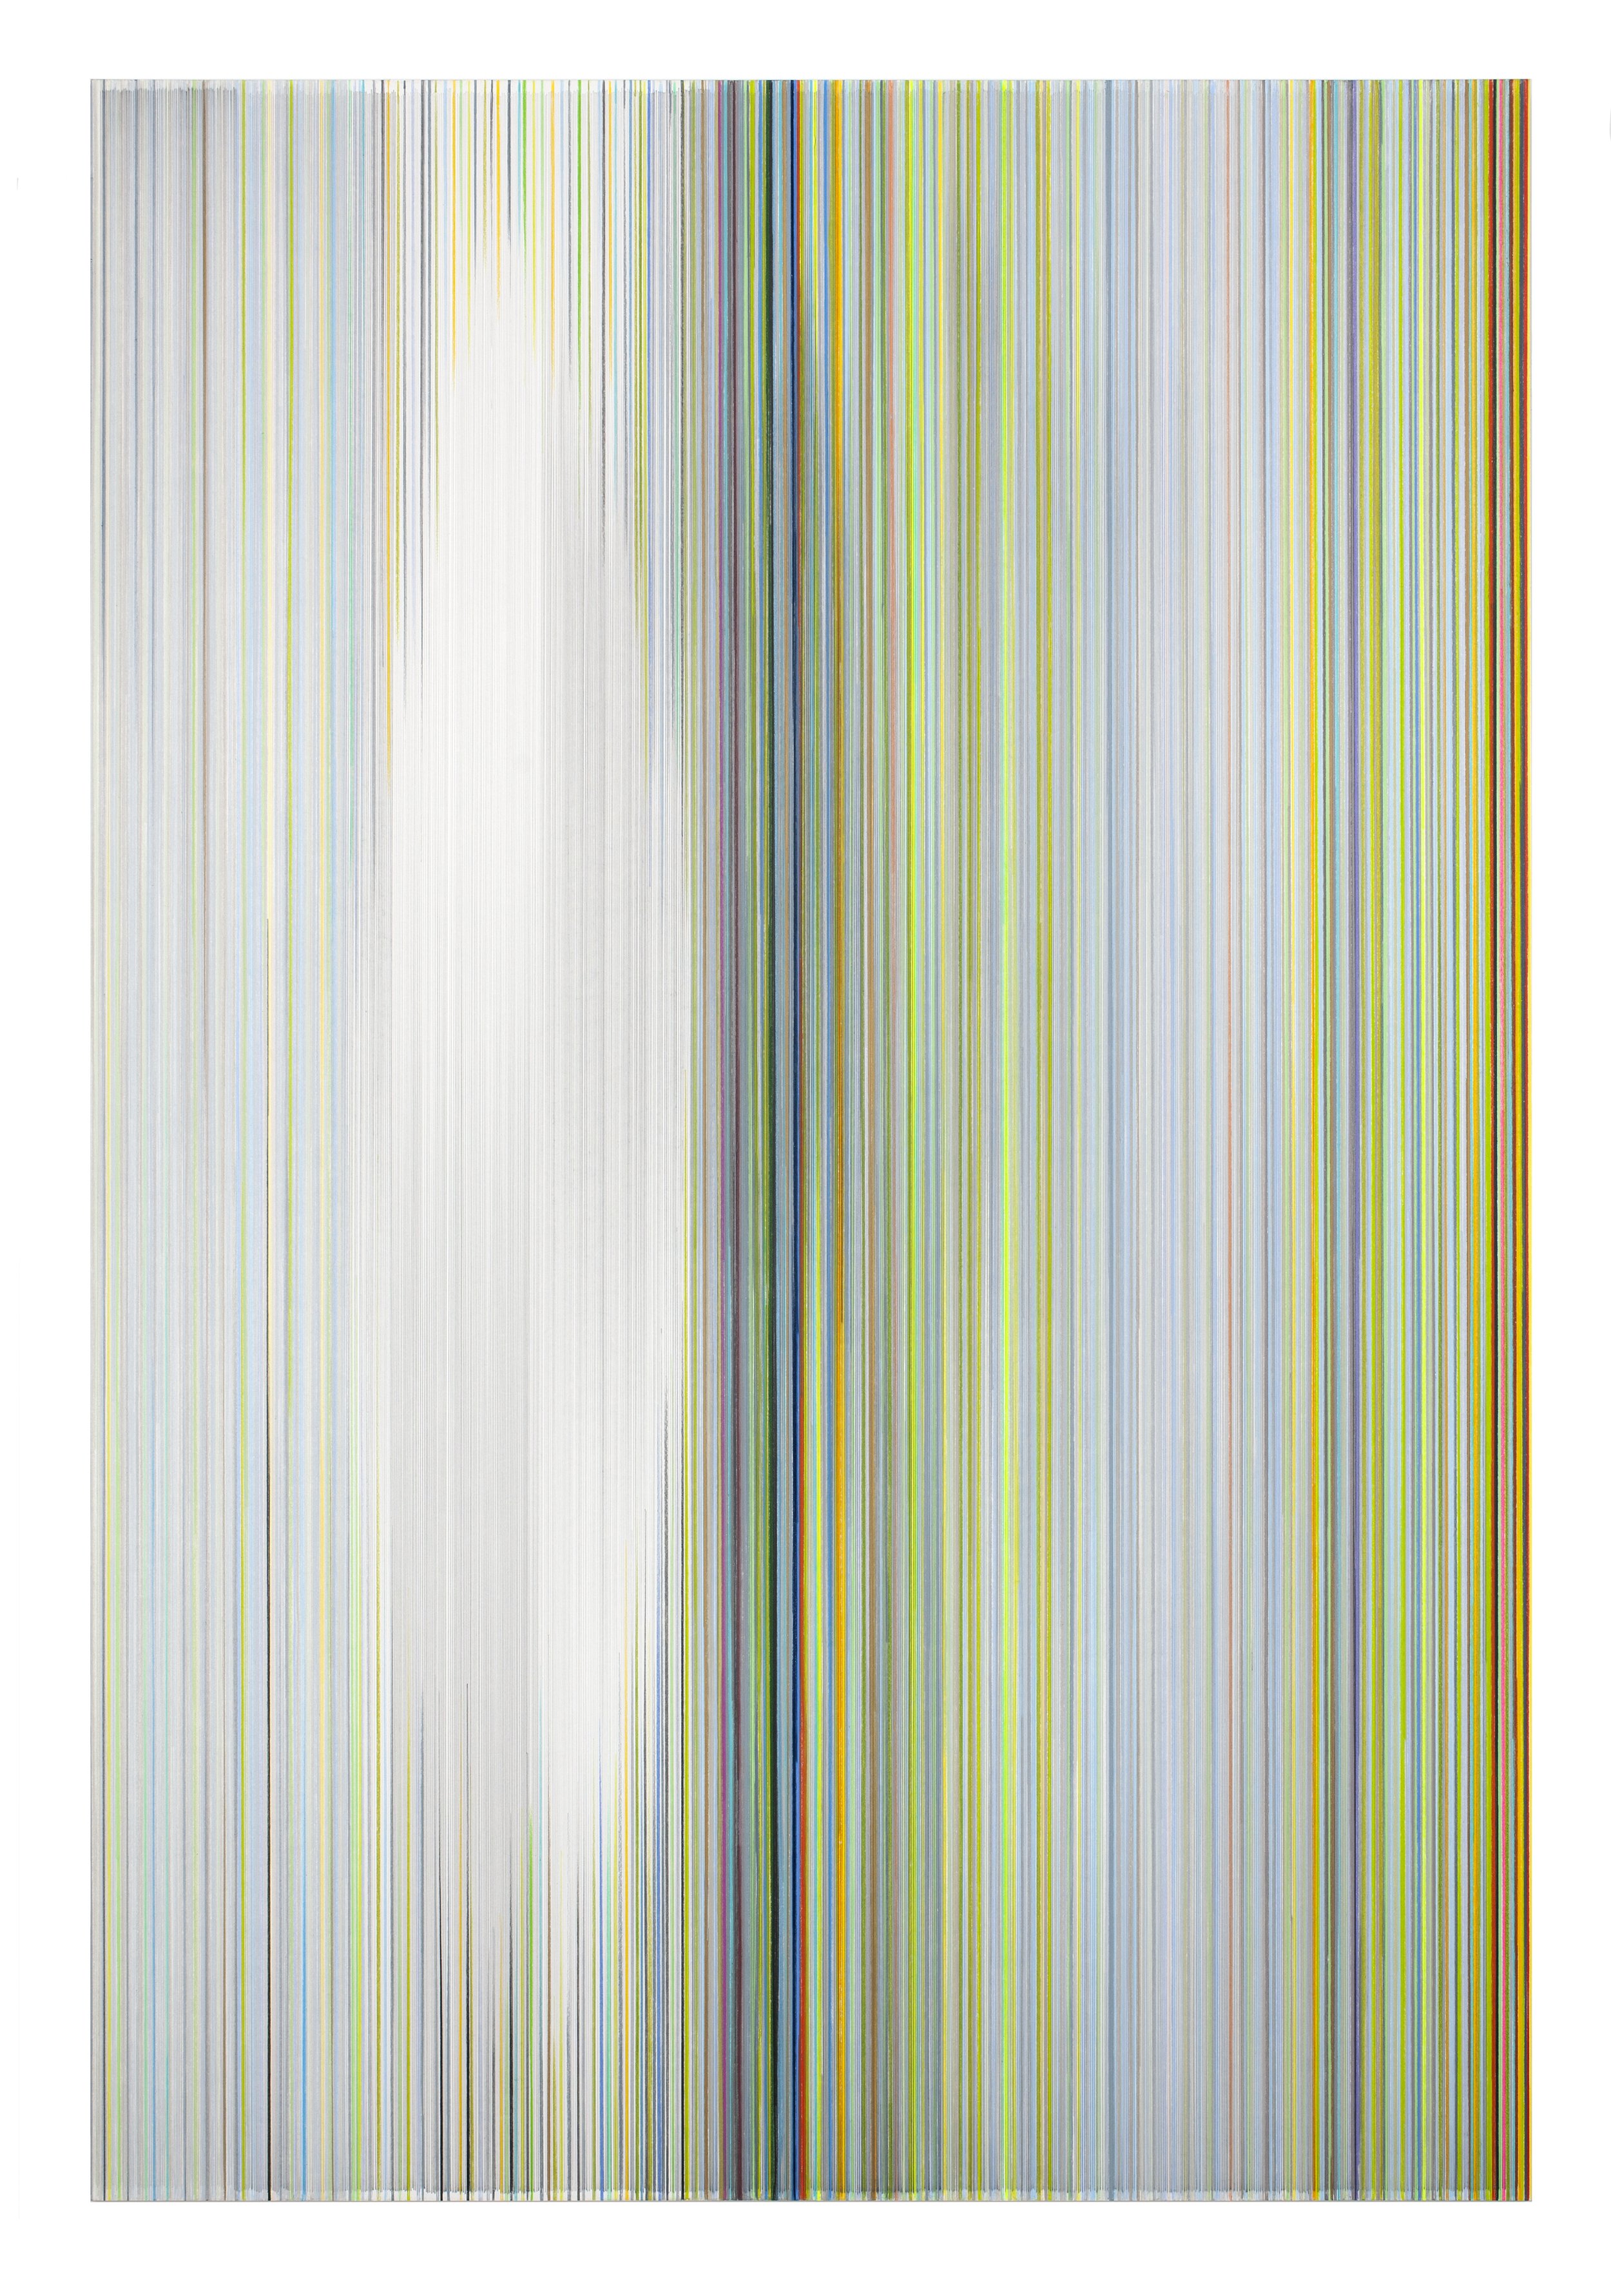    apparition everyday   2022 graphite and colored pencil on mat board 62 x 43 inches 